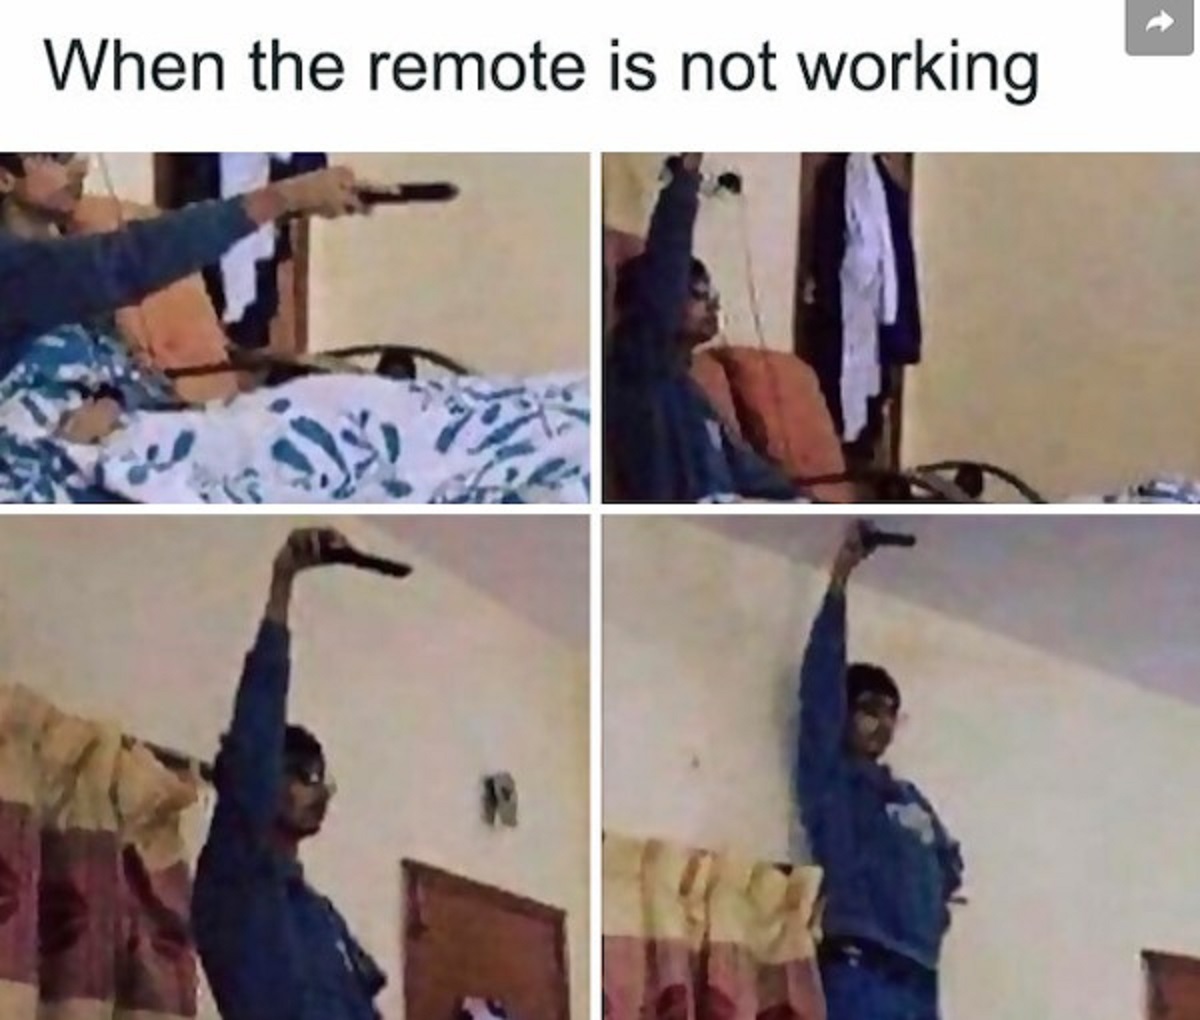 remote doesnt work meme - When the remote is not working